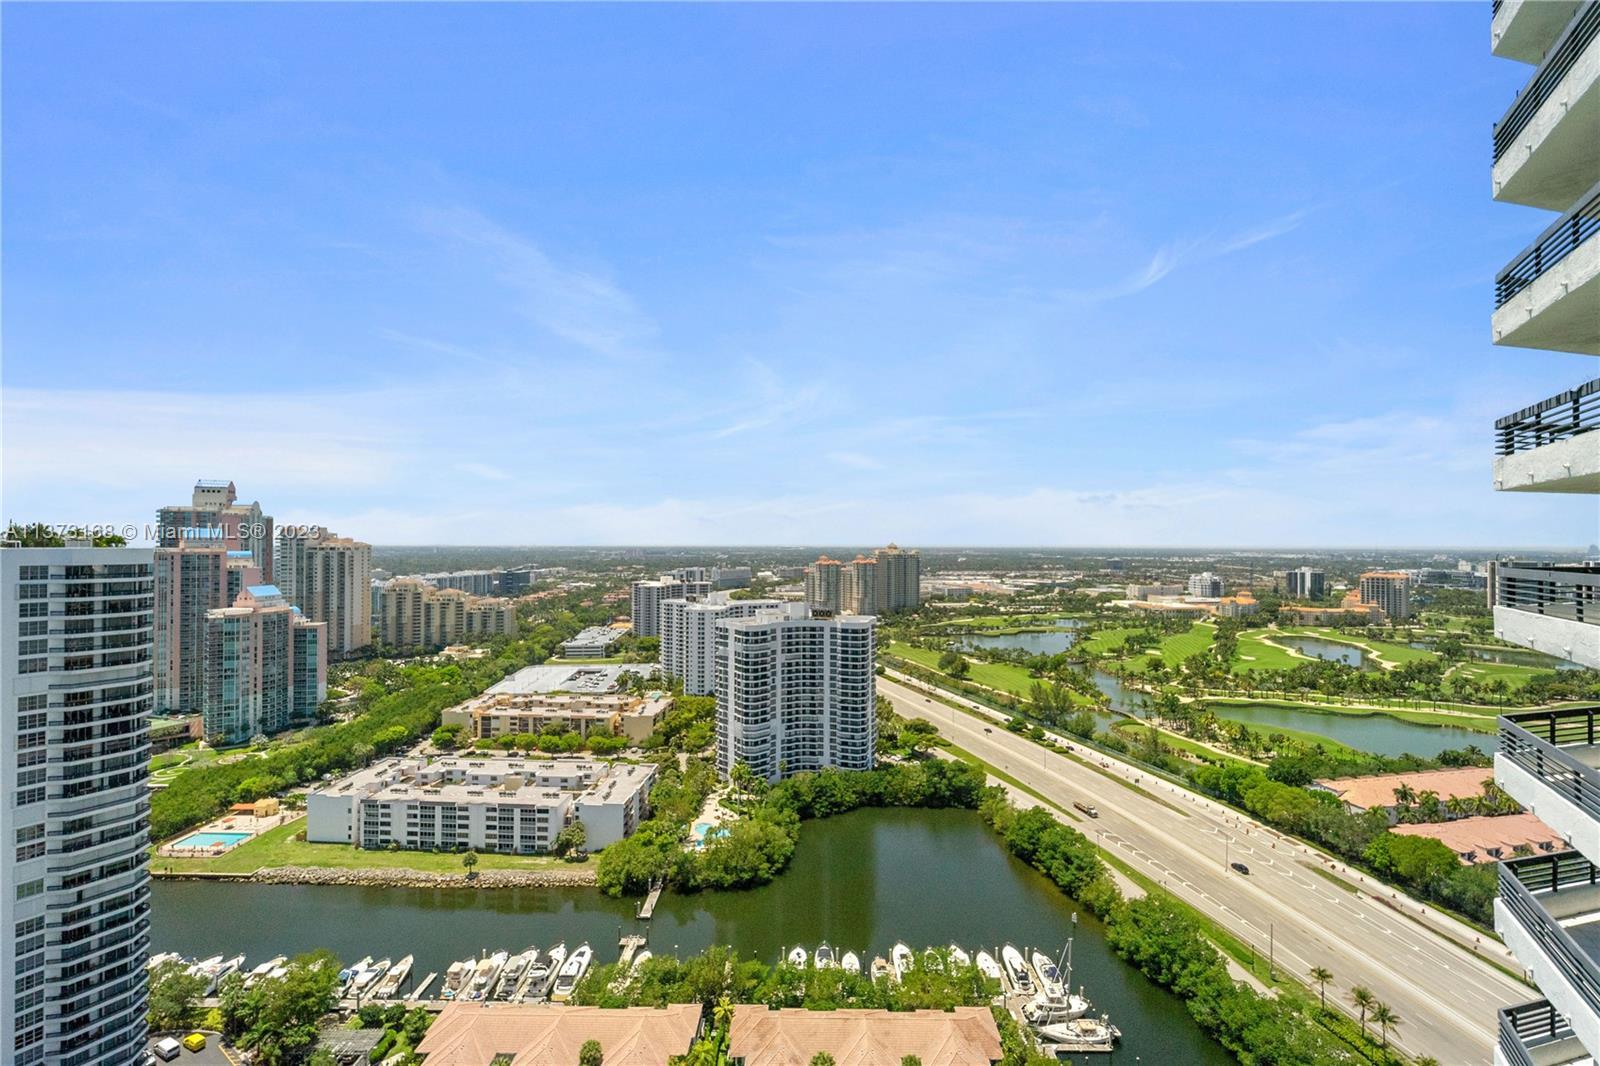 Mystic Pointe - Tower 400 / Aventura / 2 Beds, 2 Baths / 1,353 sq. ft. / Beautiful views of the intr